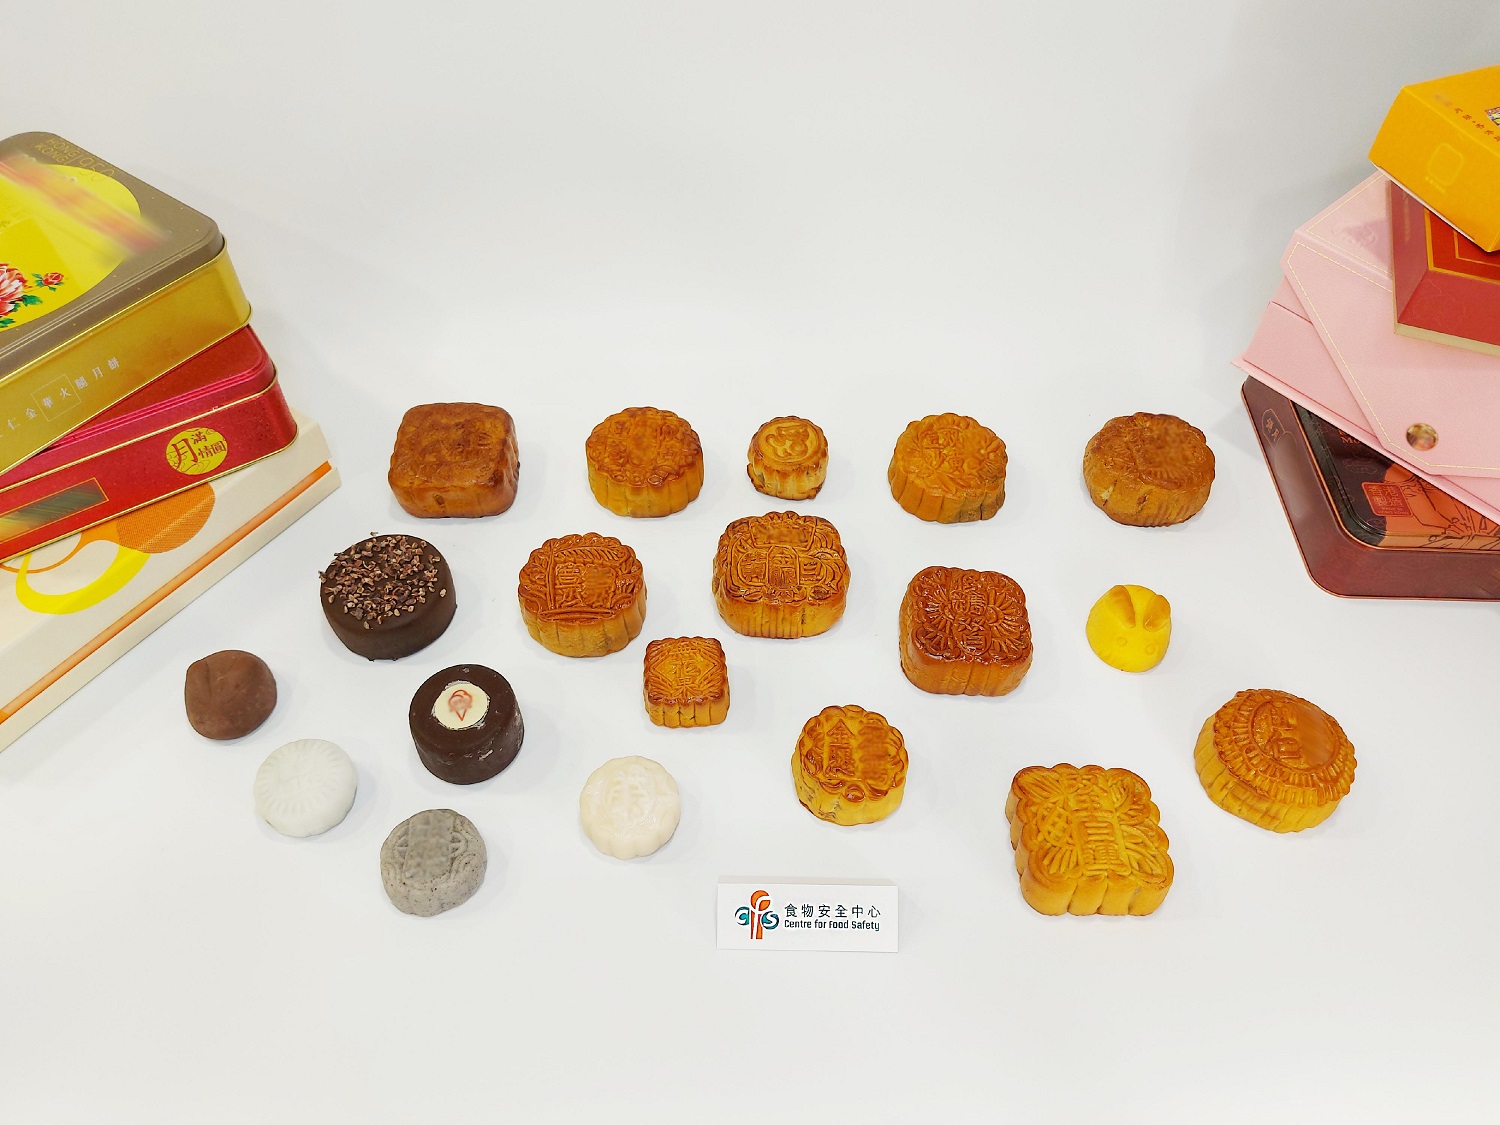 The Centre for Food Safety of the Food and Environmental Hygiene Department today (September 21) announced the test results of the seasonal food surveillance project on mooncakes (second phase). All 151 samples tested were satisfactory.